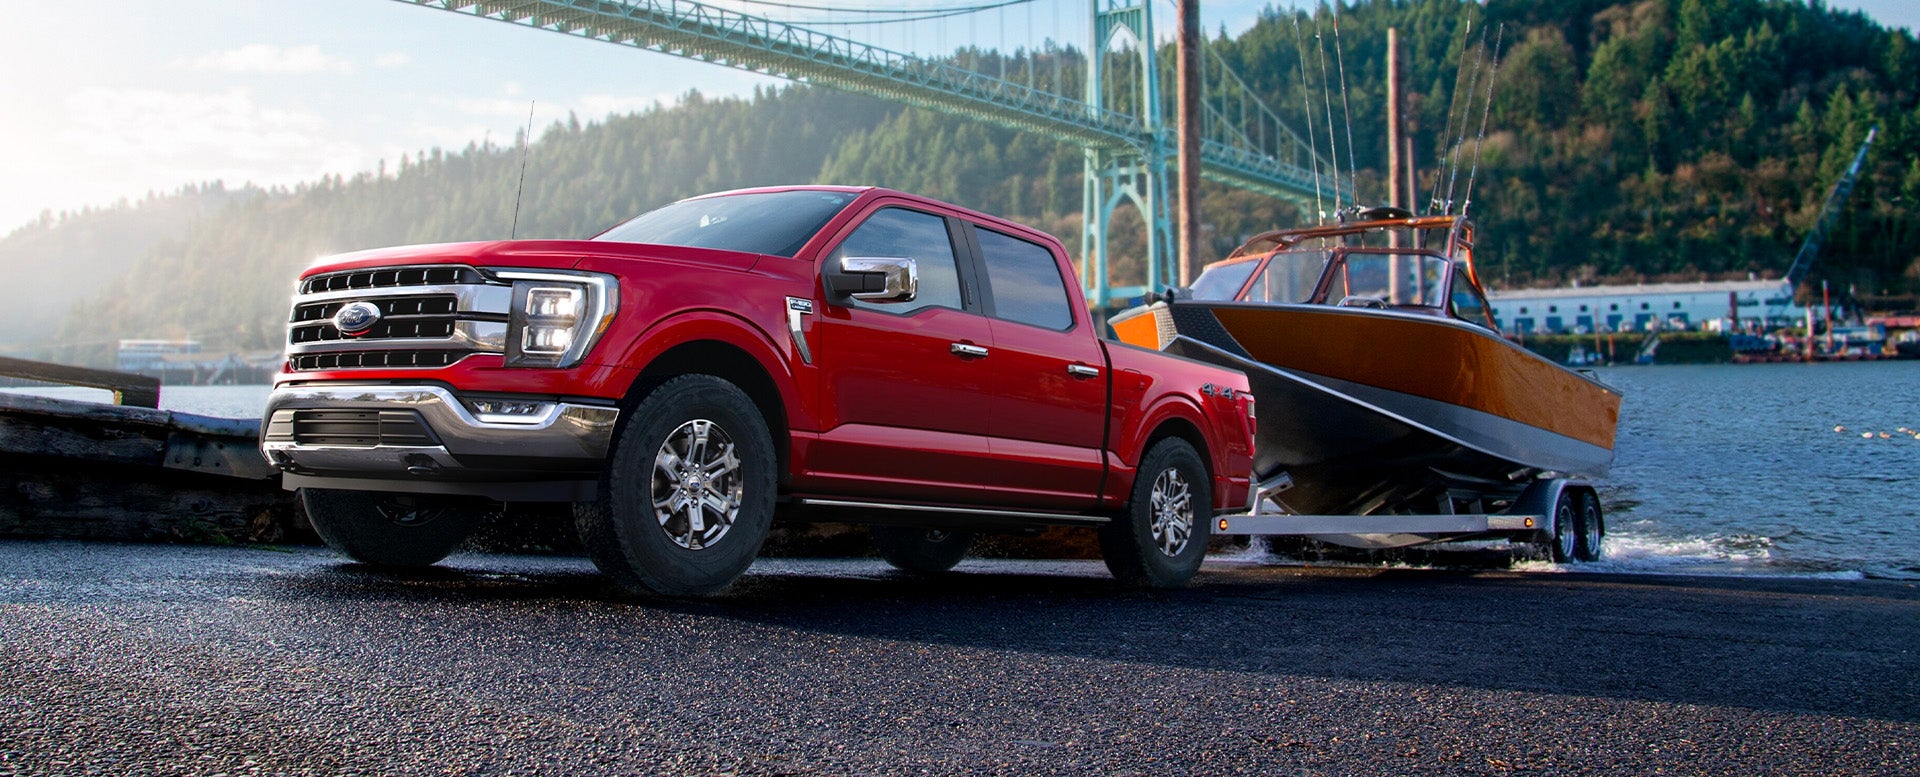 Ford F-150 Towing Capacity